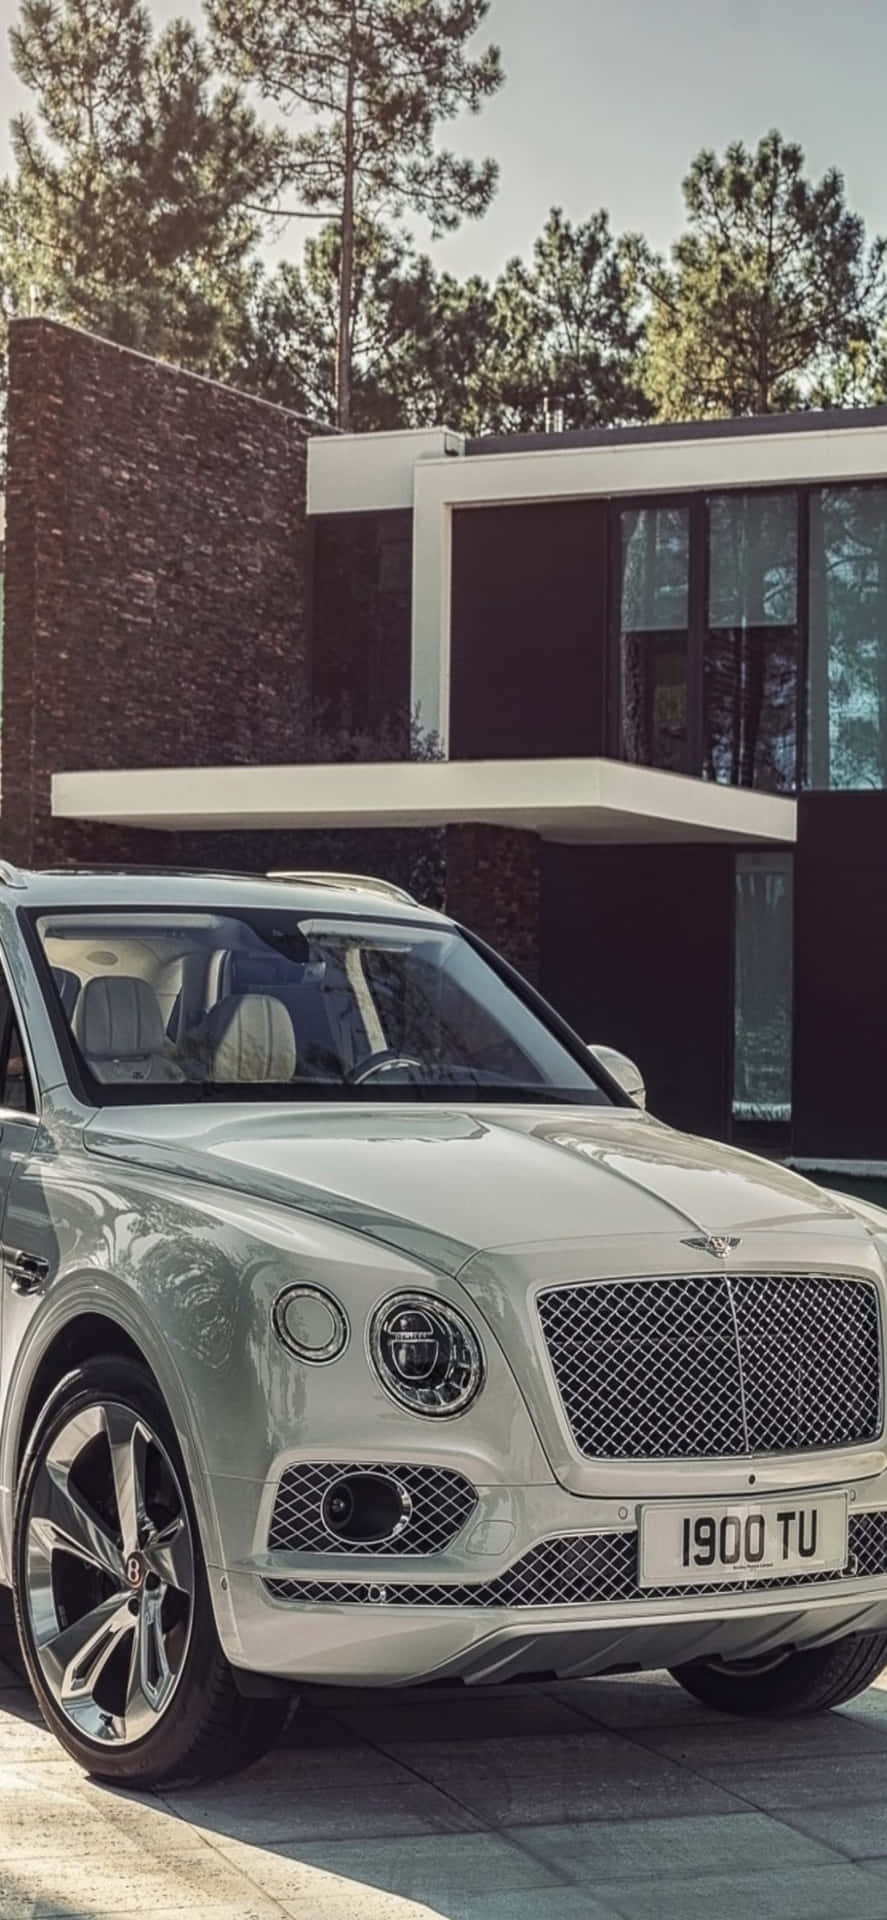 "Experience a Luxury Lifestyle with the Iphone Xs Max and Bentley"